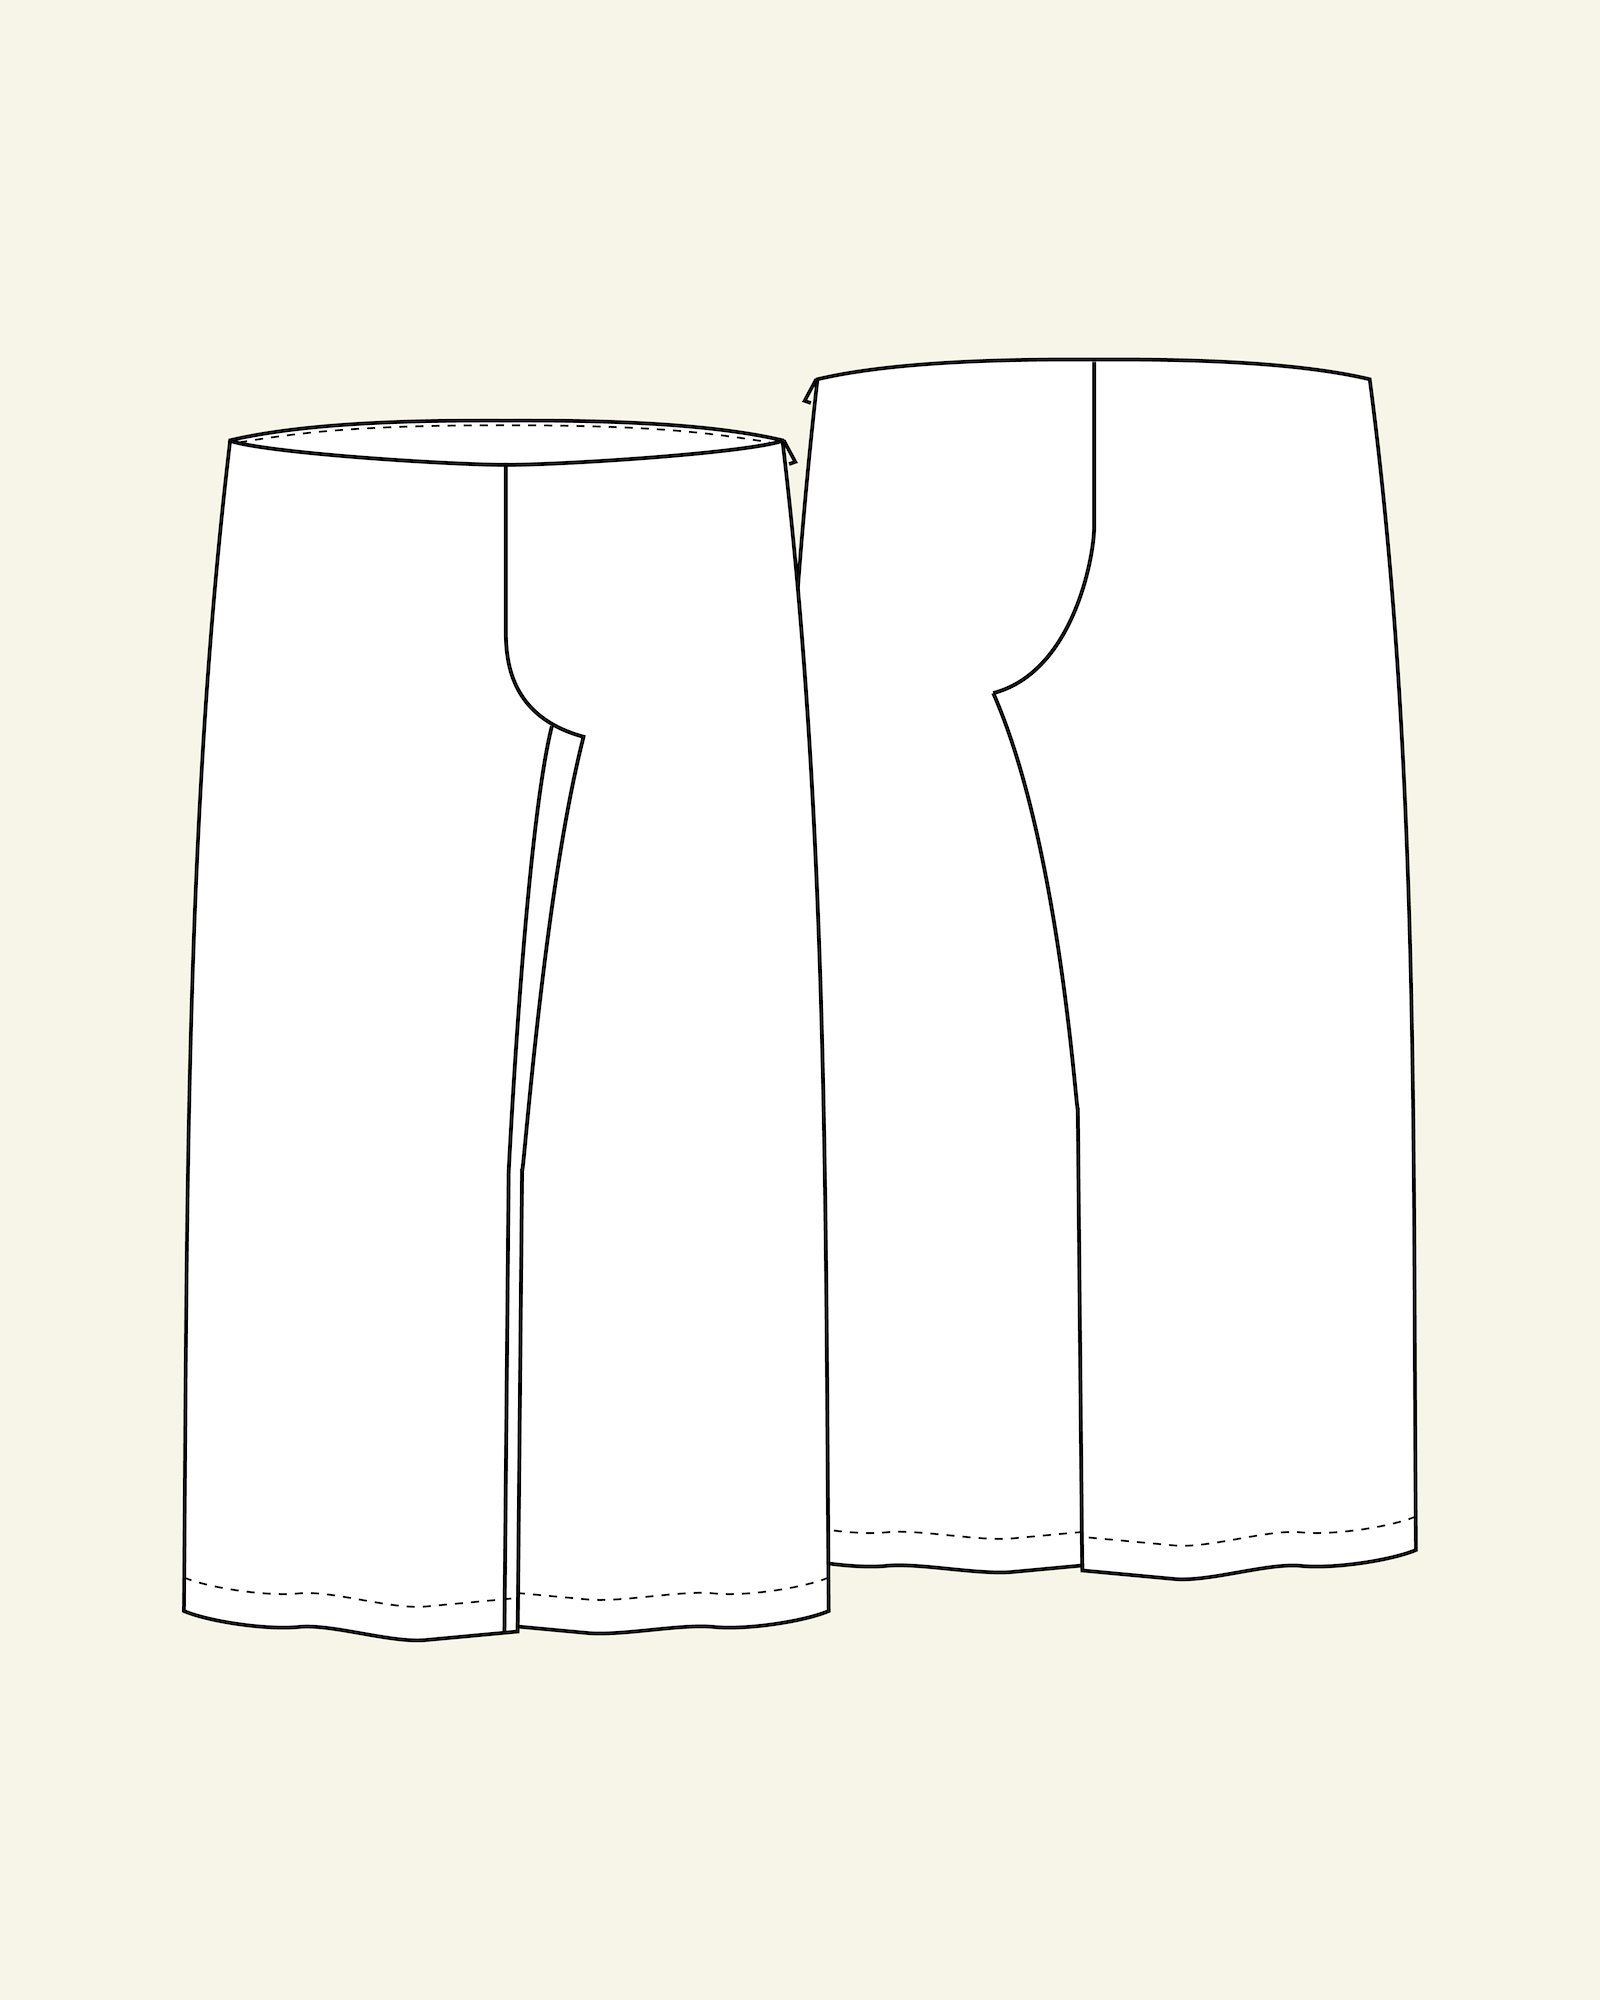 Boot cut trousers, 46/18 p70005_pack